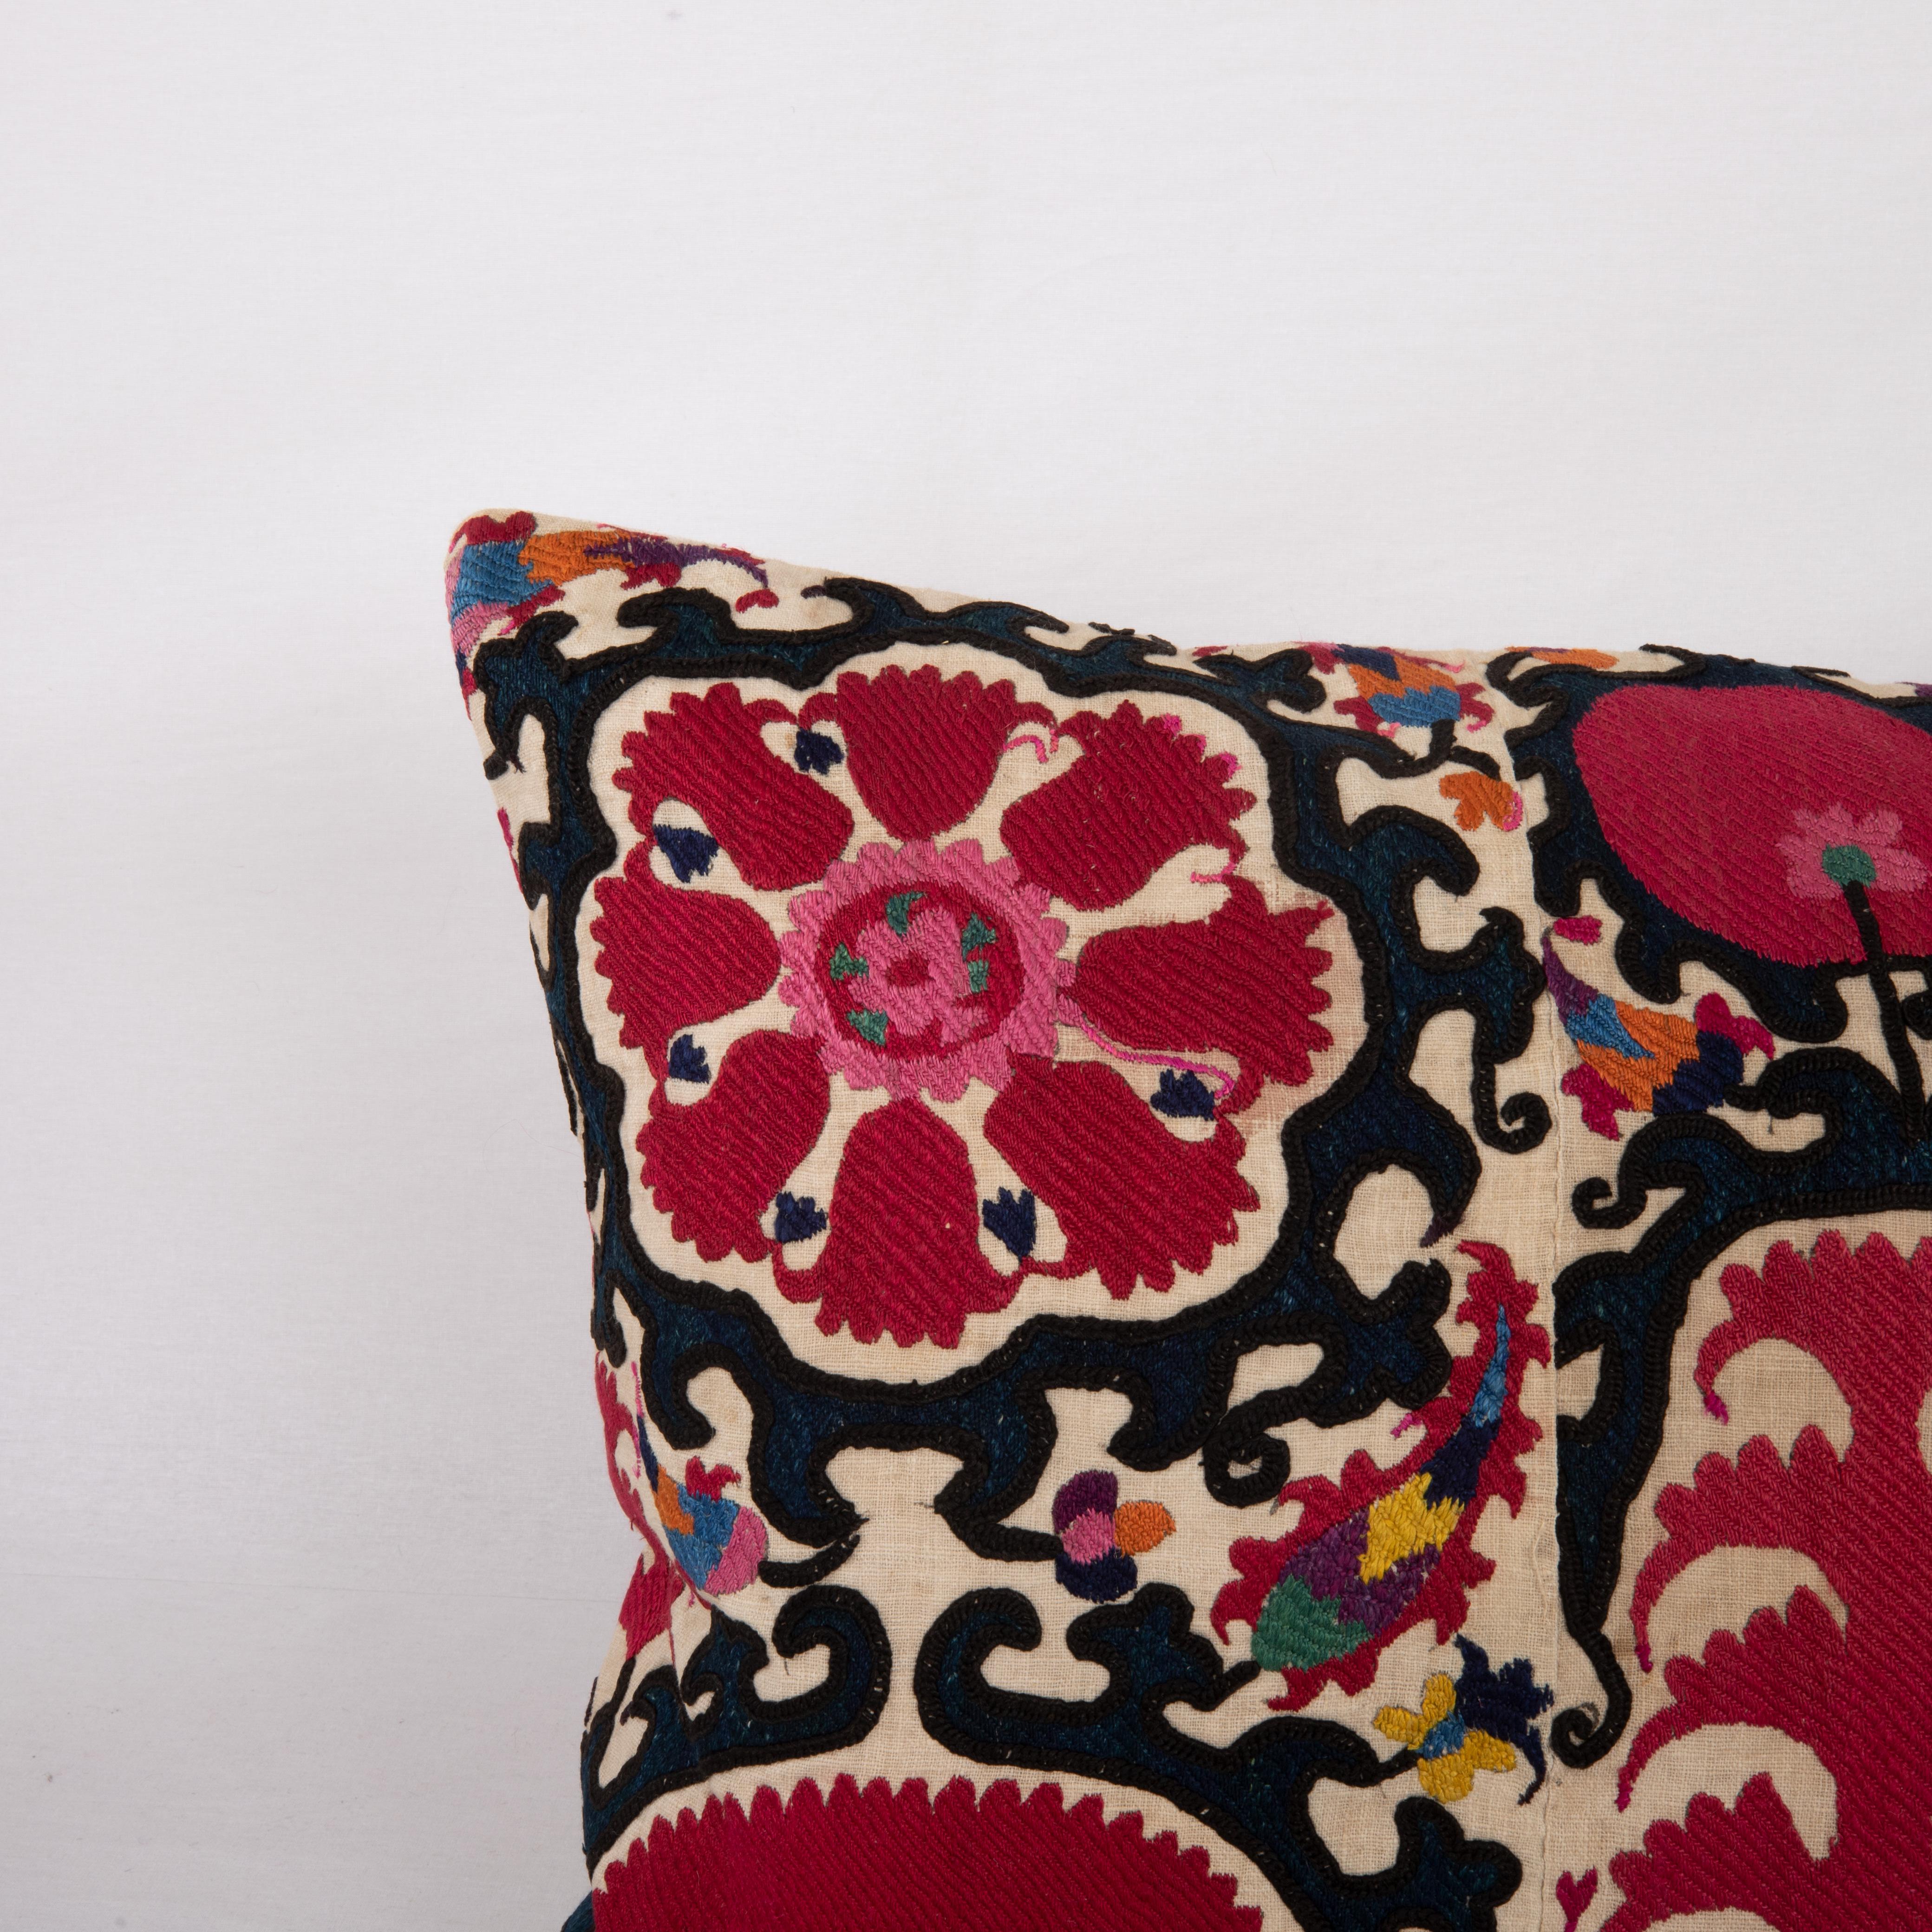 Uzbek Antique Suzani Pillow Cover, Made from a late 19th C. Tajik Suzani For Sale